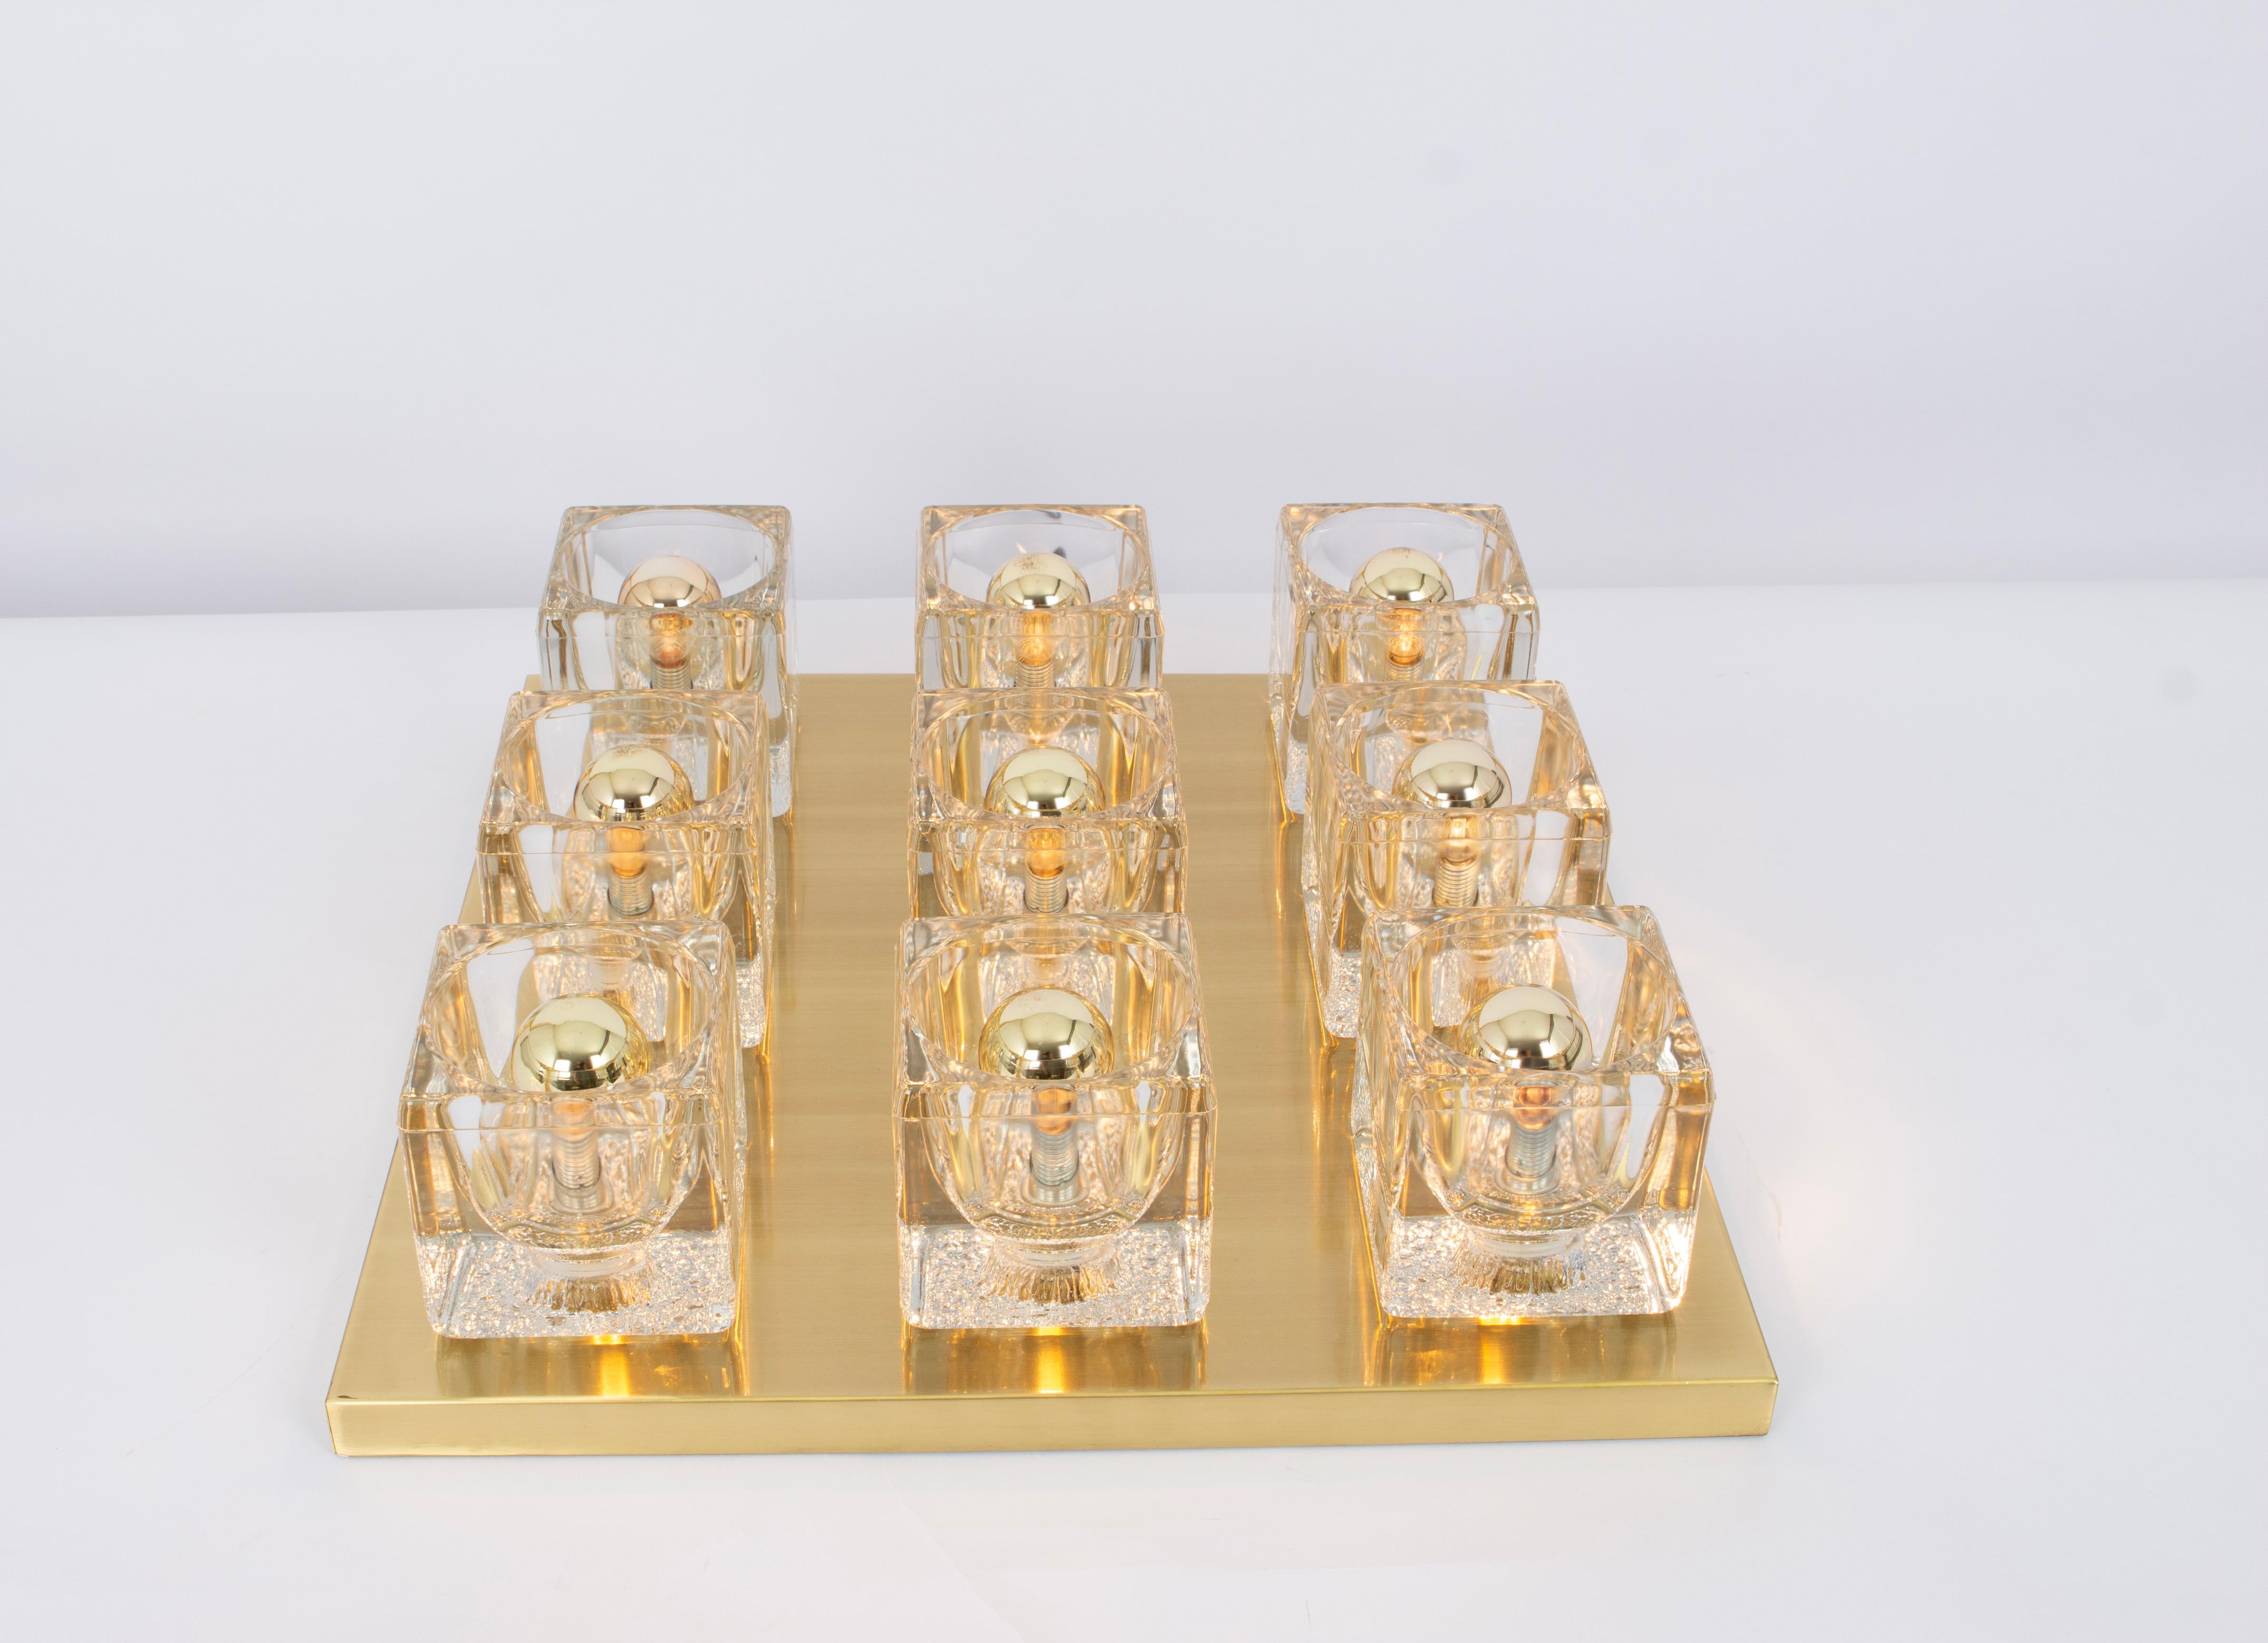 Fantastic mid-century flush mount by Peill & Putzler, Germany, manufactured, circa 1970-1979. 
9 Cube glasses over a brass frame.
High quality and in very good condition. Cleaned, well-wired, and ready to use. 
Gorgeous Light effect.

The fixture